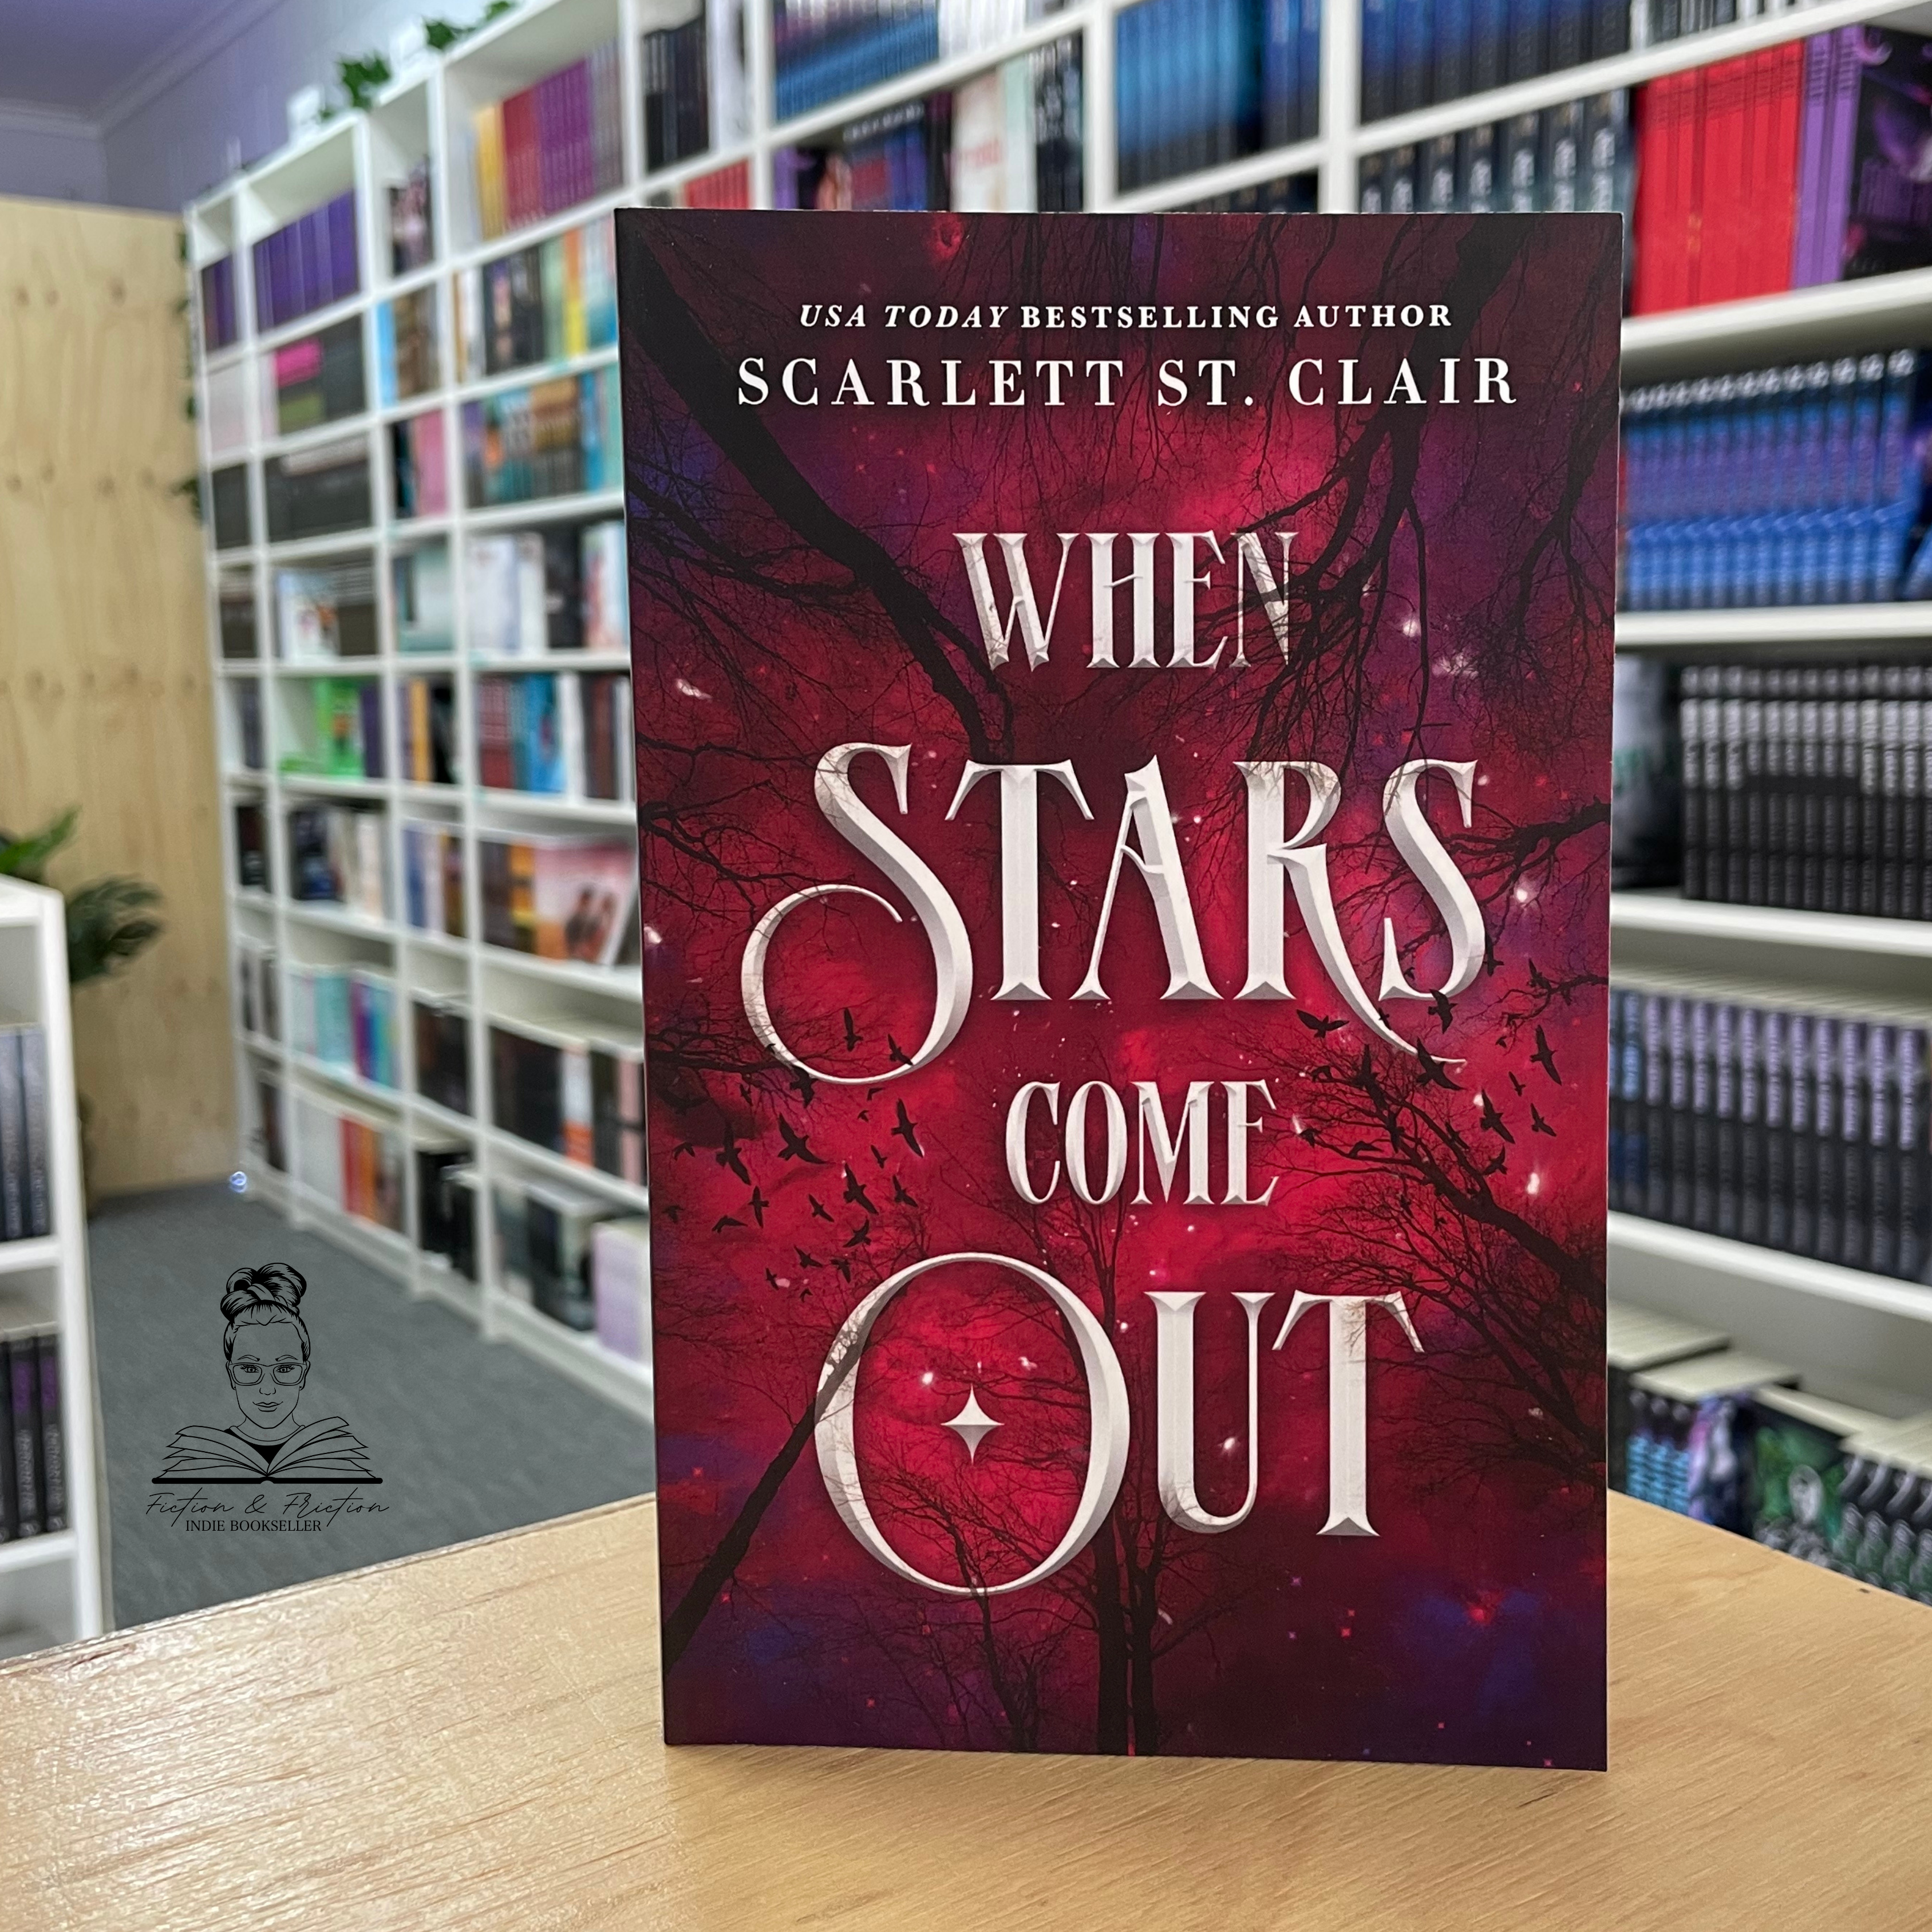 When Stars Come Out by Scarlett St Clair